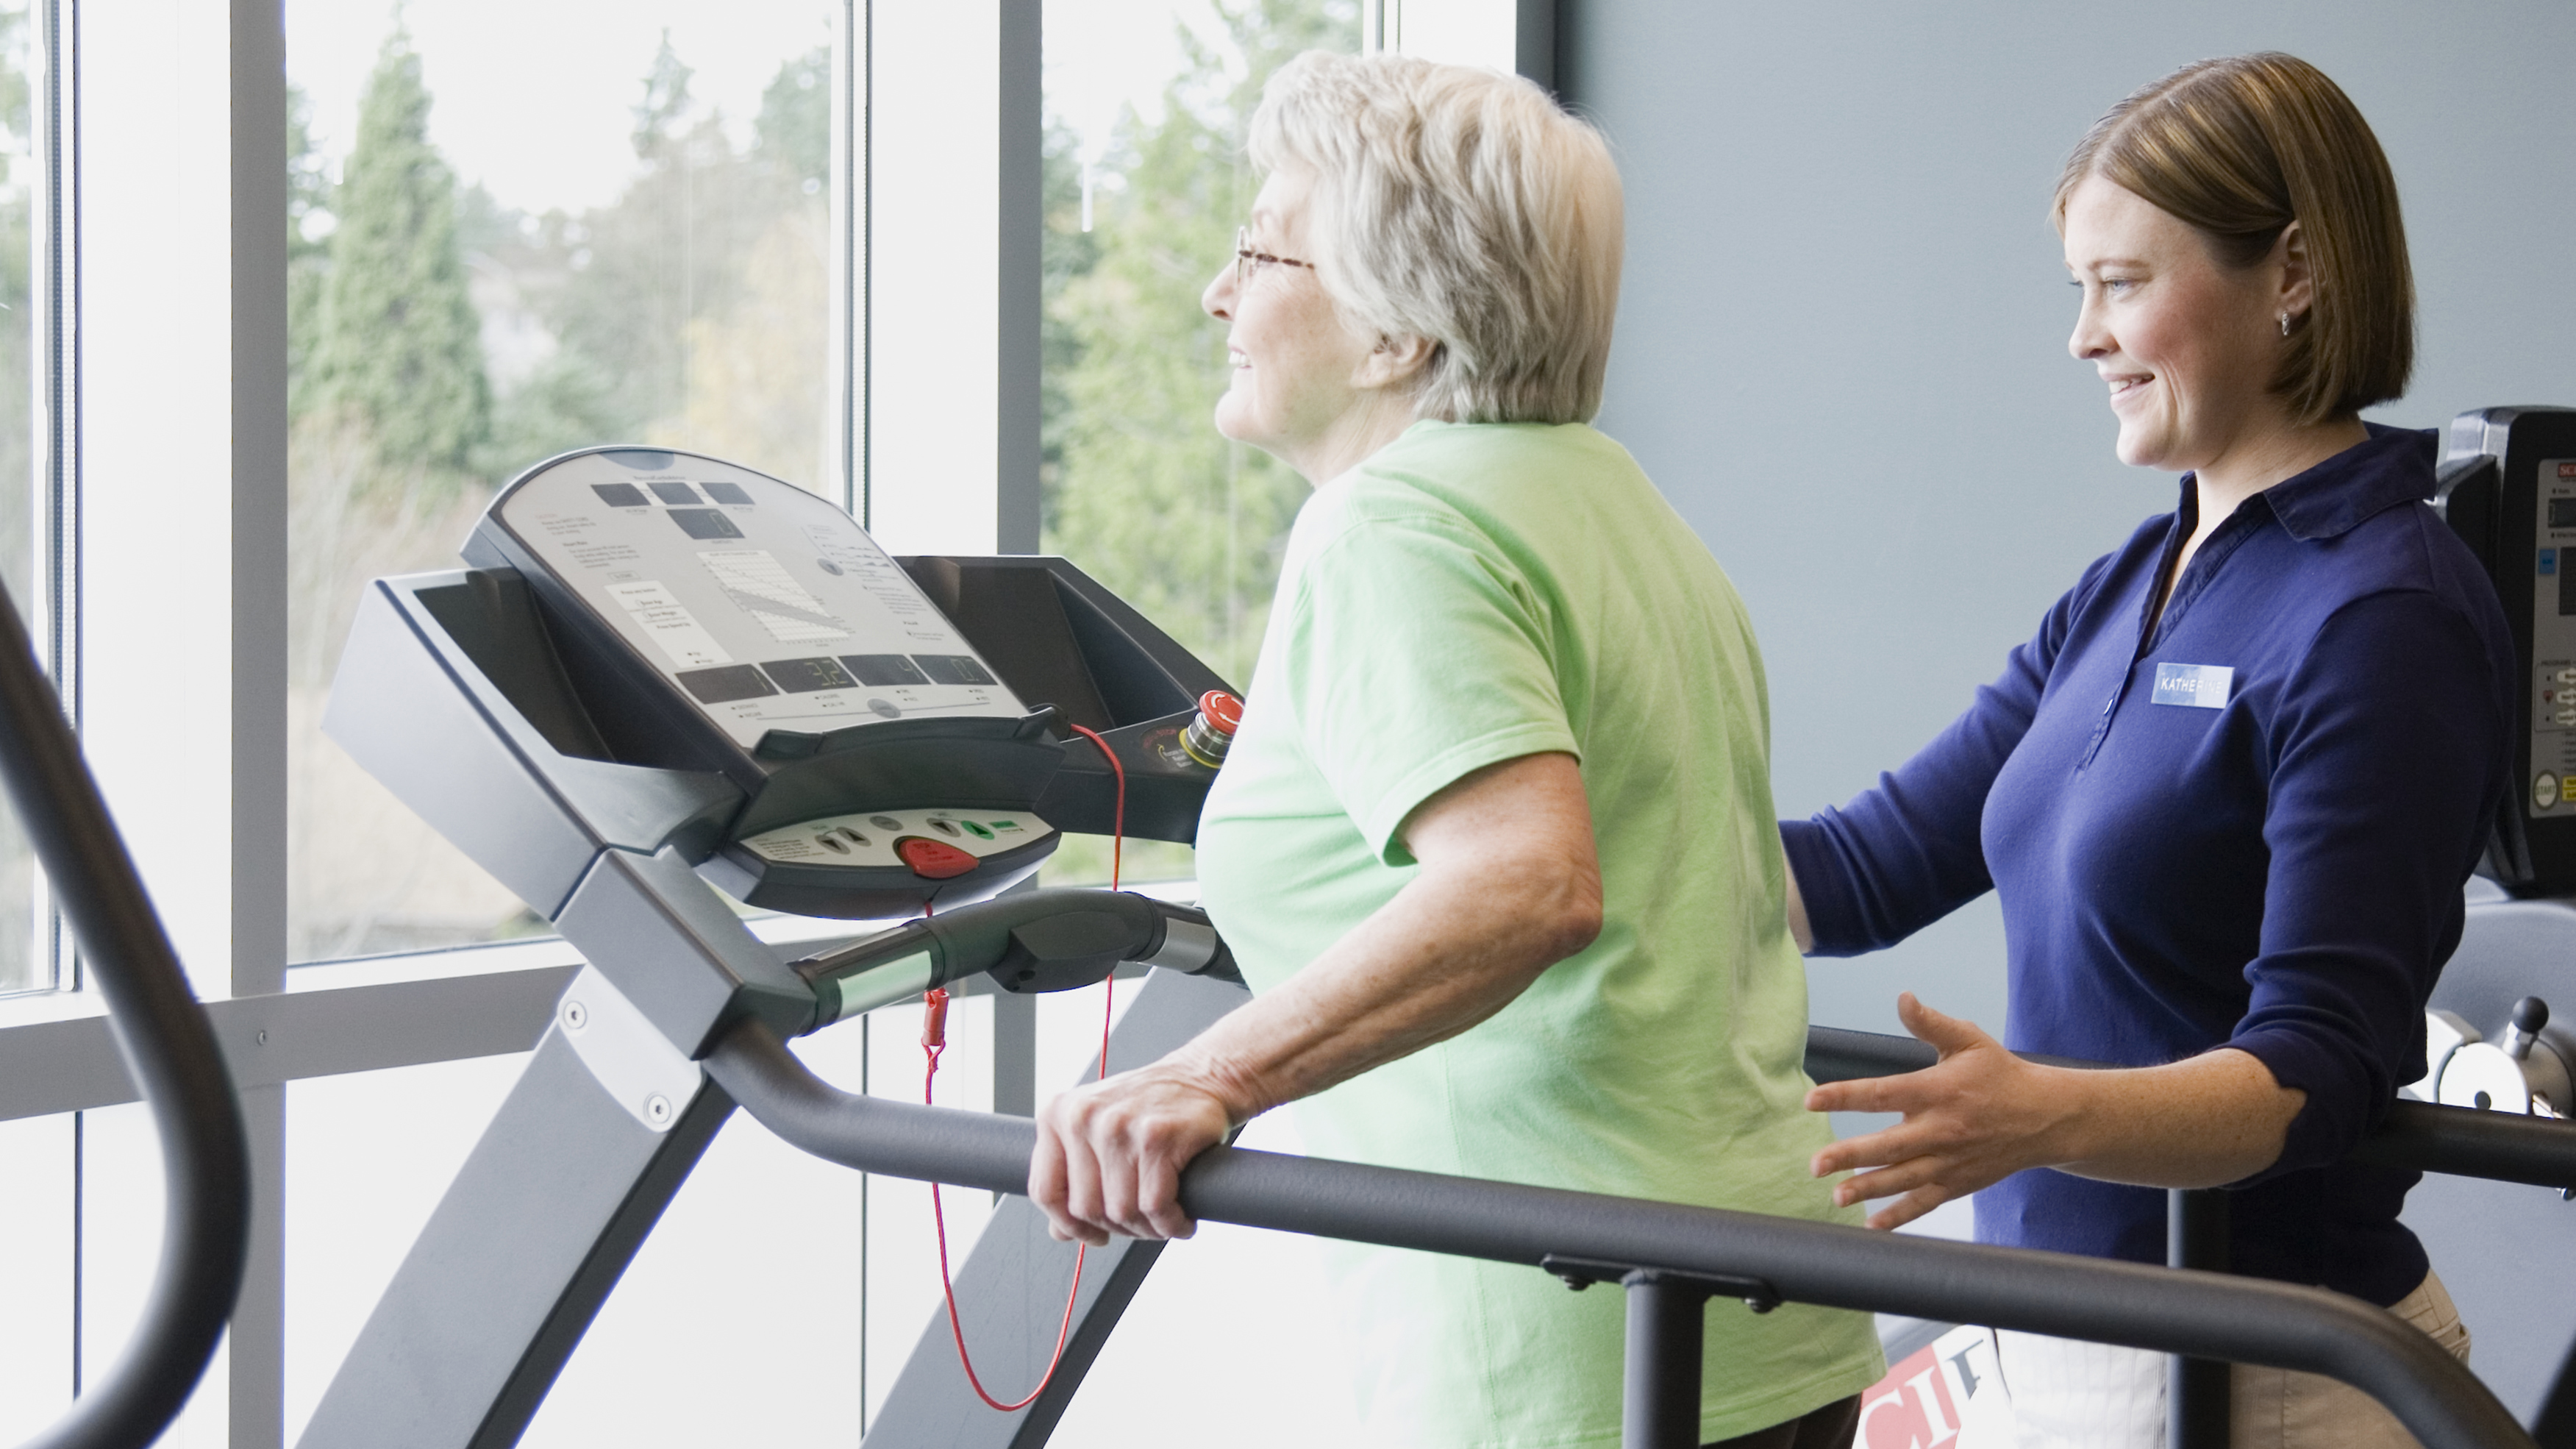 Physical therapist helping elderly person on treadmill